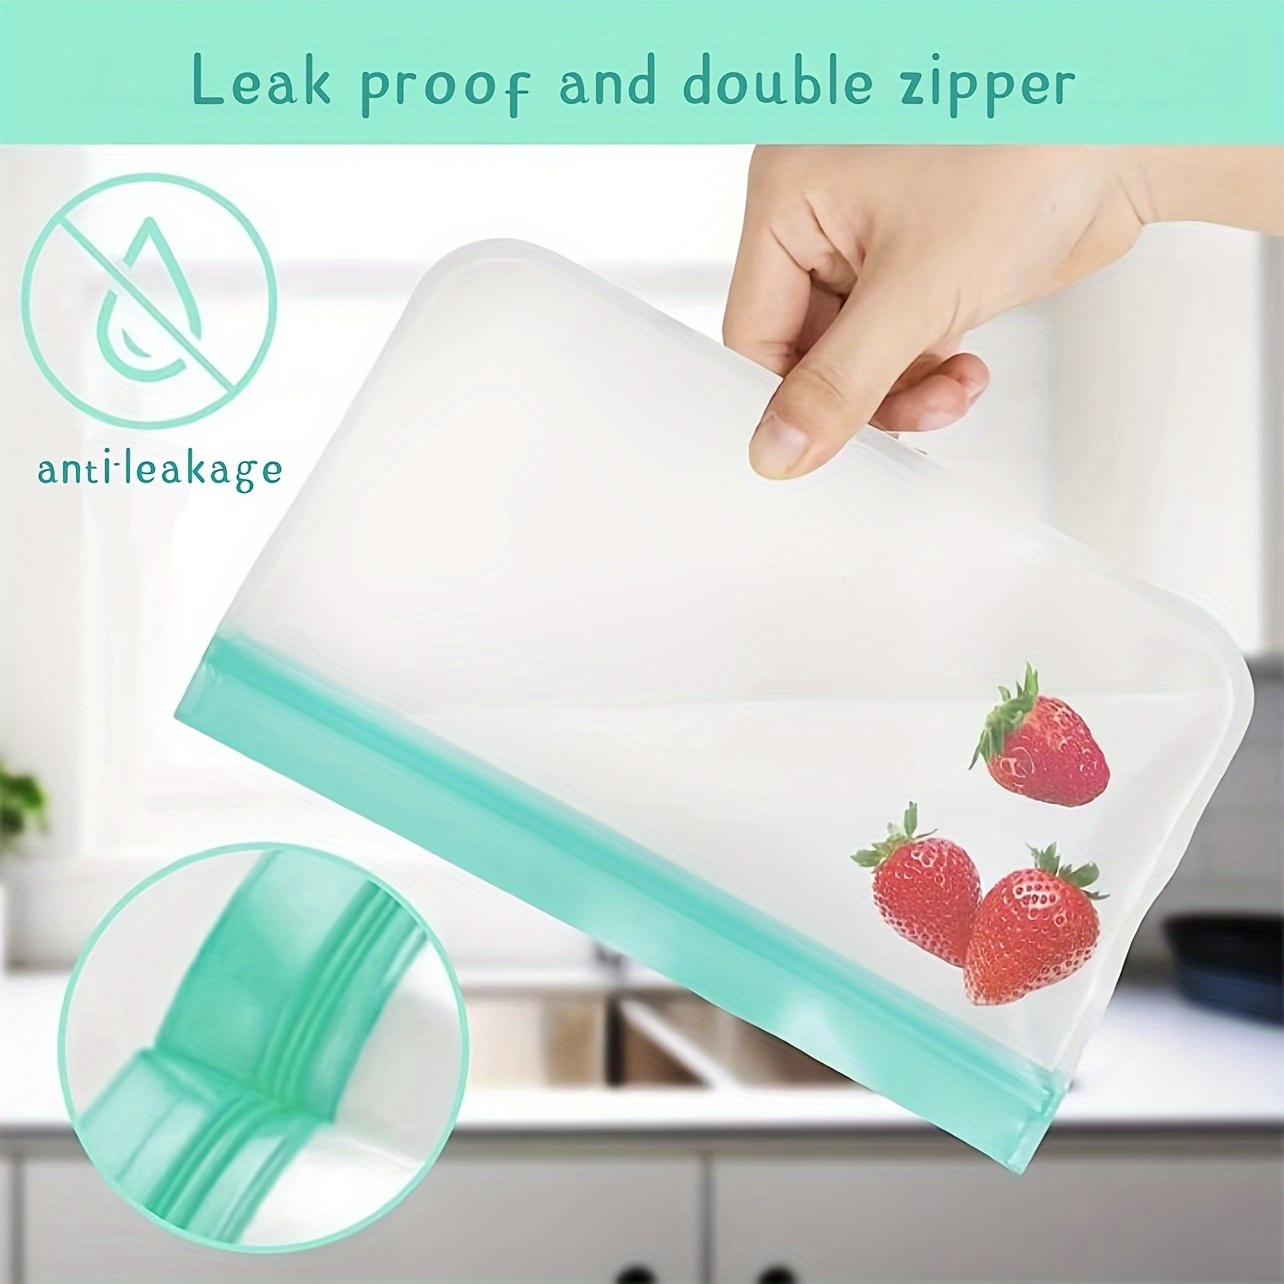 24 Pack Reusable Food Storage Bags - Non Plastic & Silicone Gallon Freezer  Bags Sandwich Snack Resealable Lunch Bags Extra Thick Leakproof for